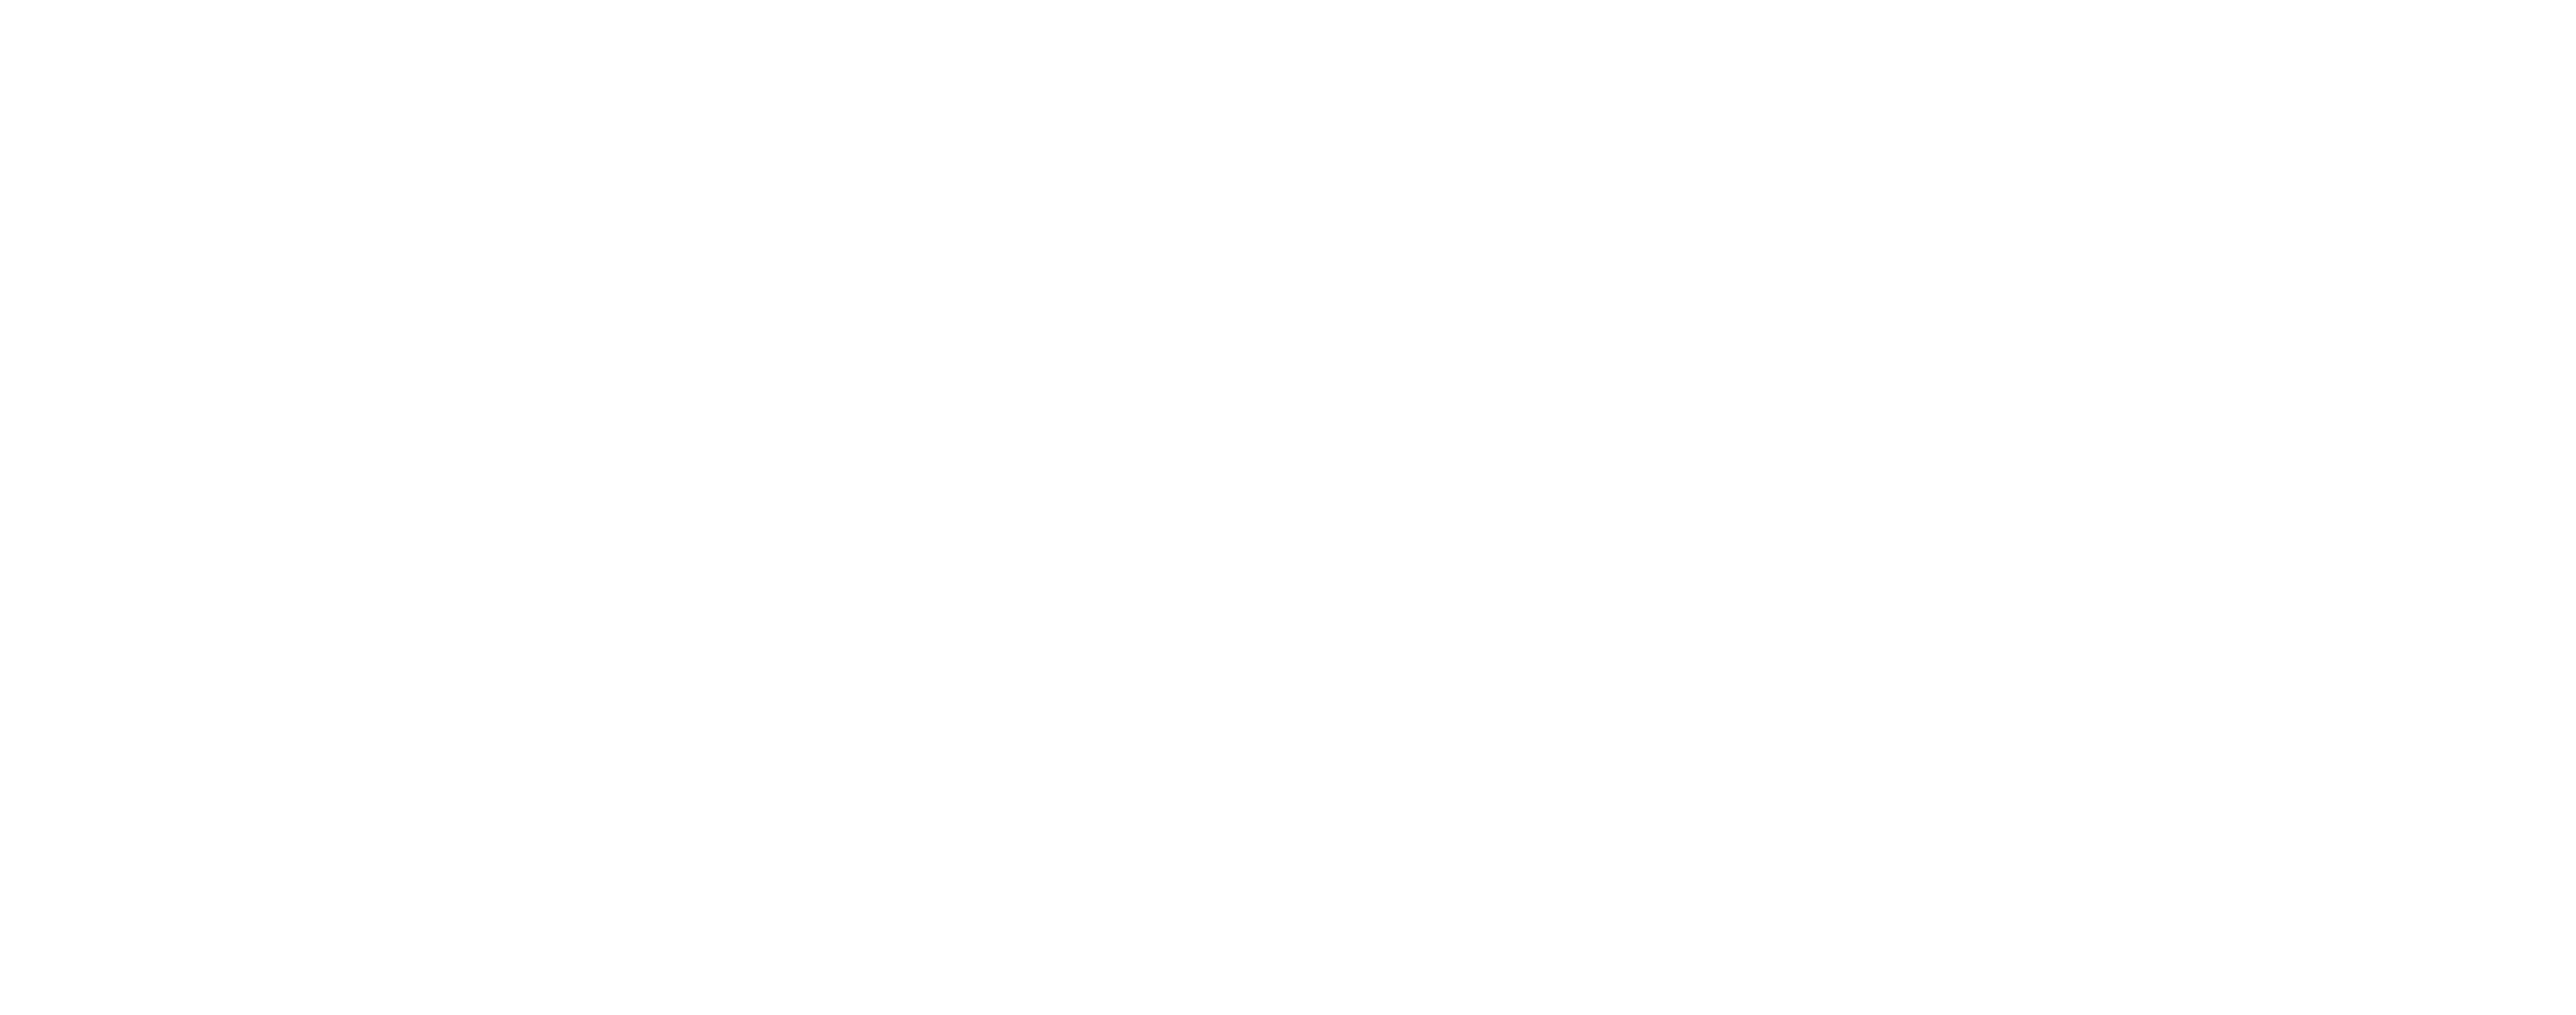 Live Out Love